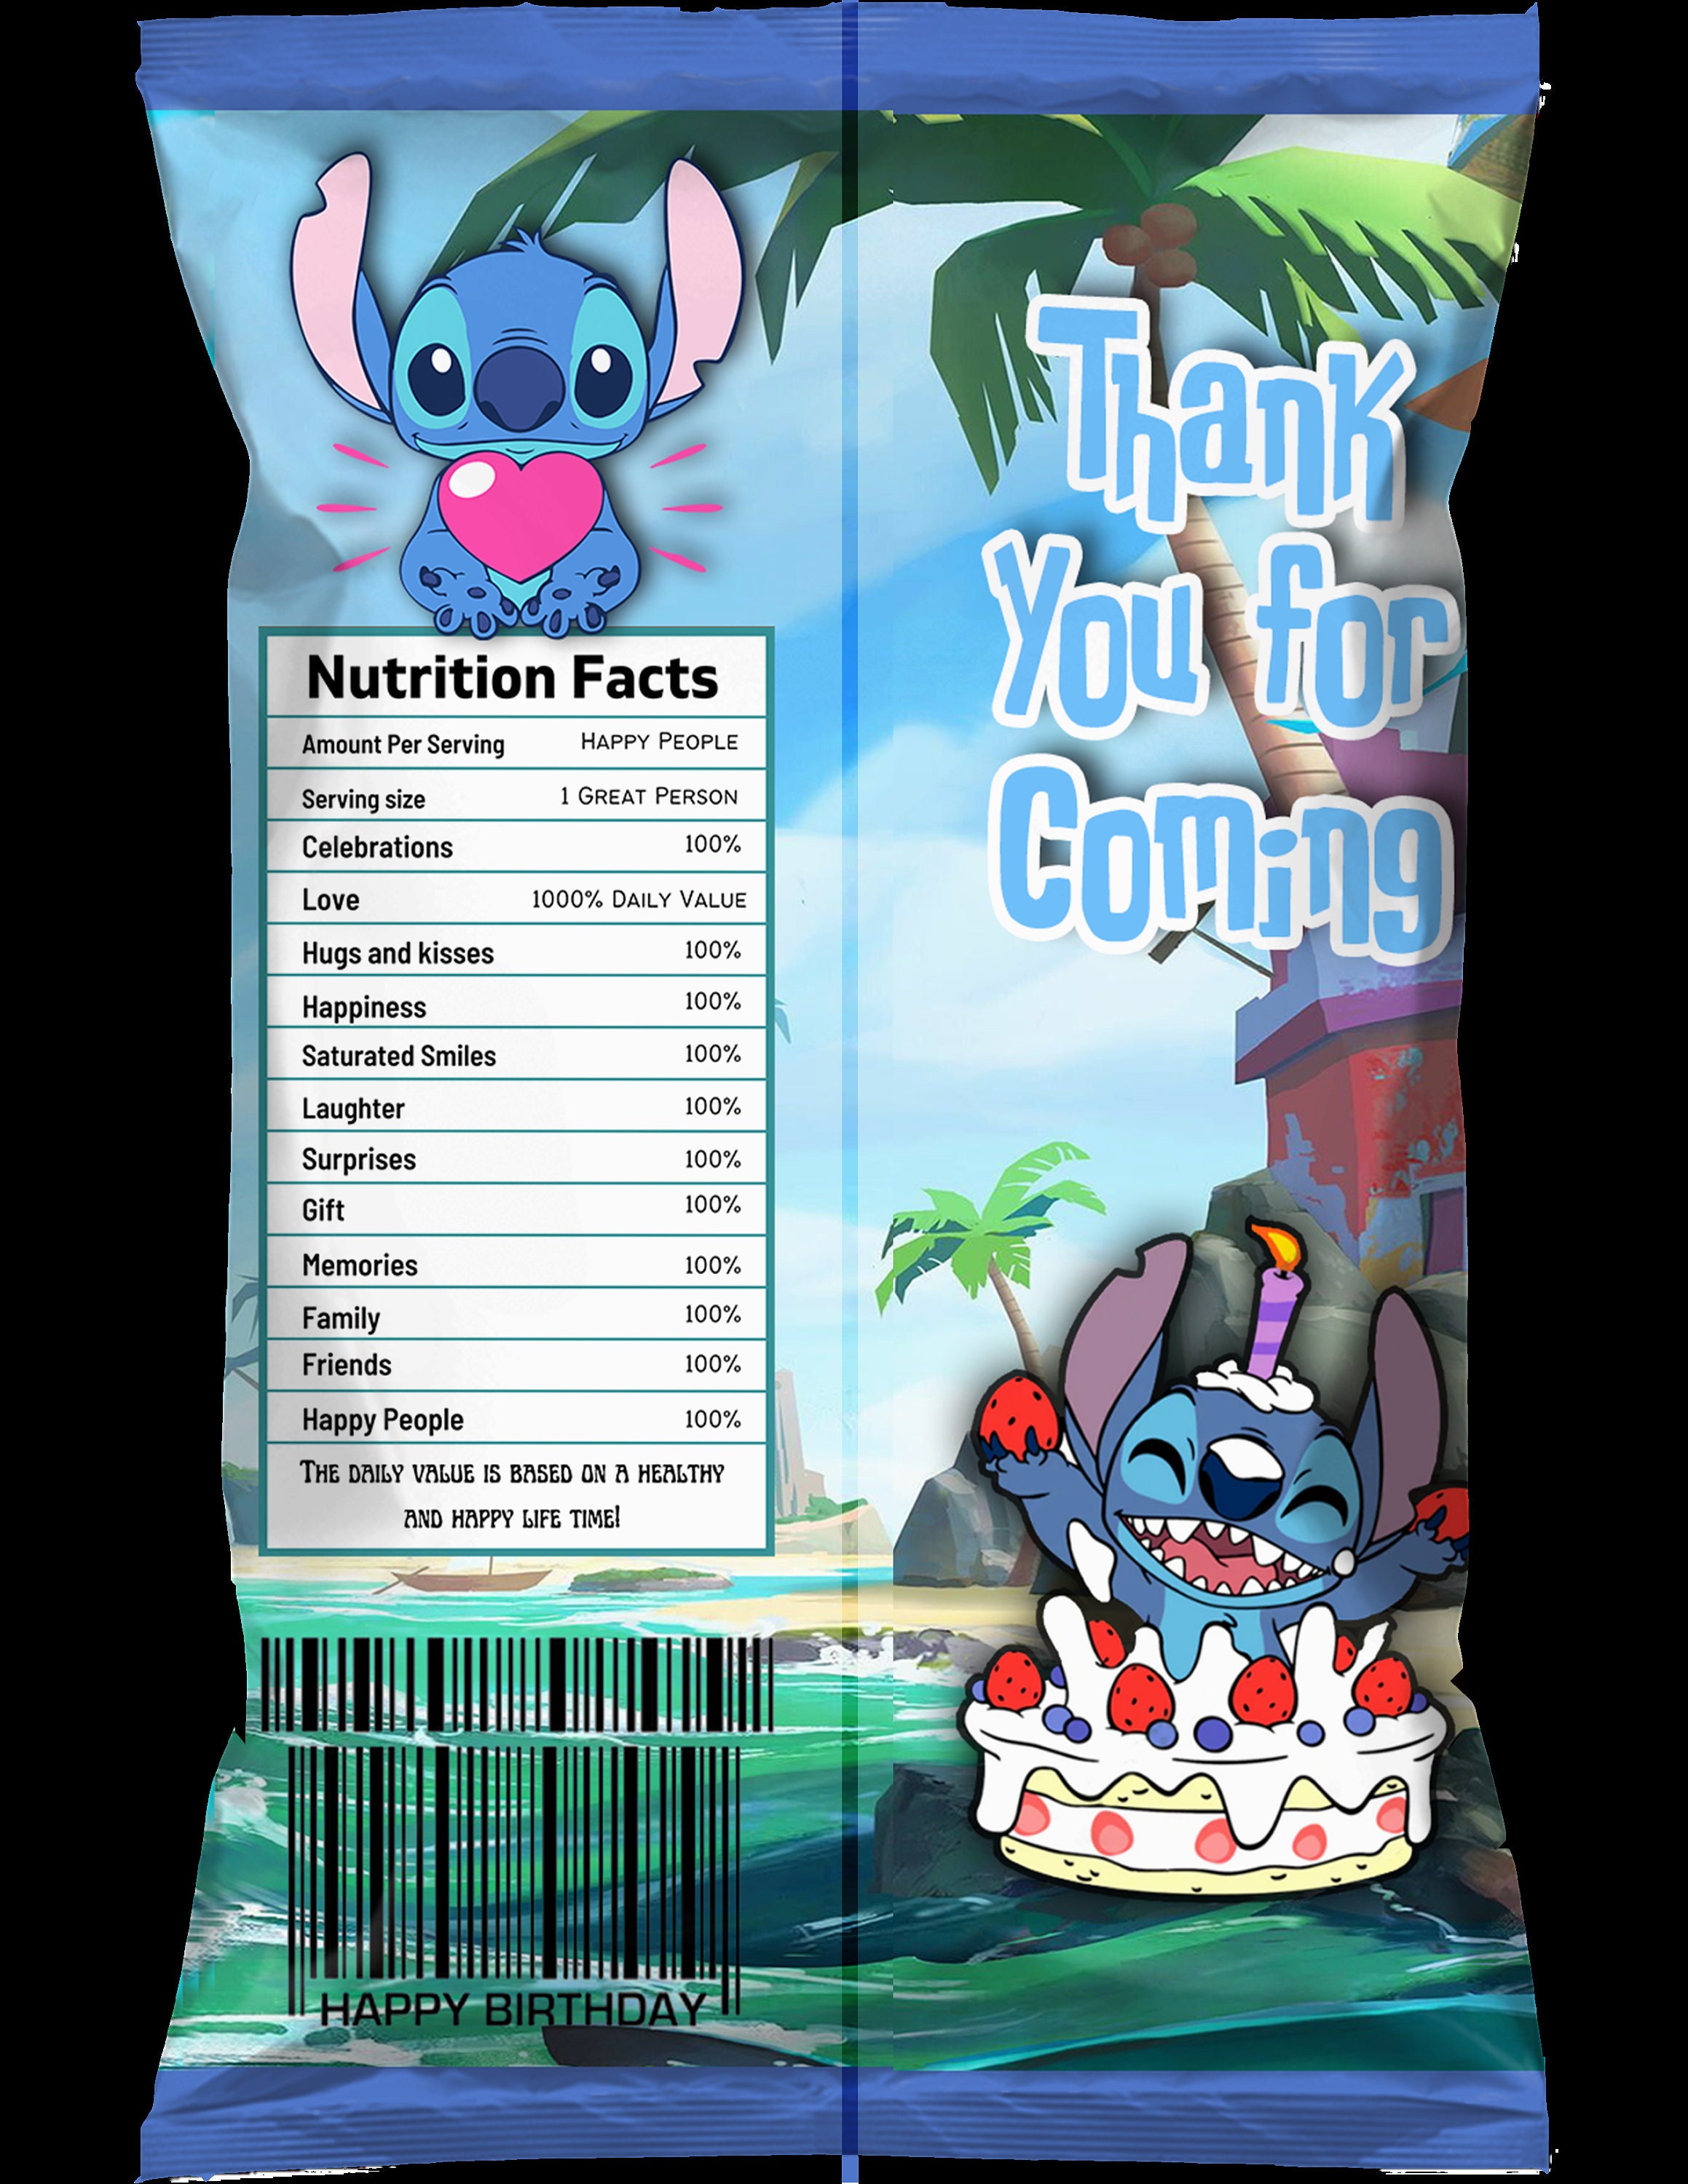 Stitch and Chip Bag with Name and Age PDF Digital File is Not Instant  Download 